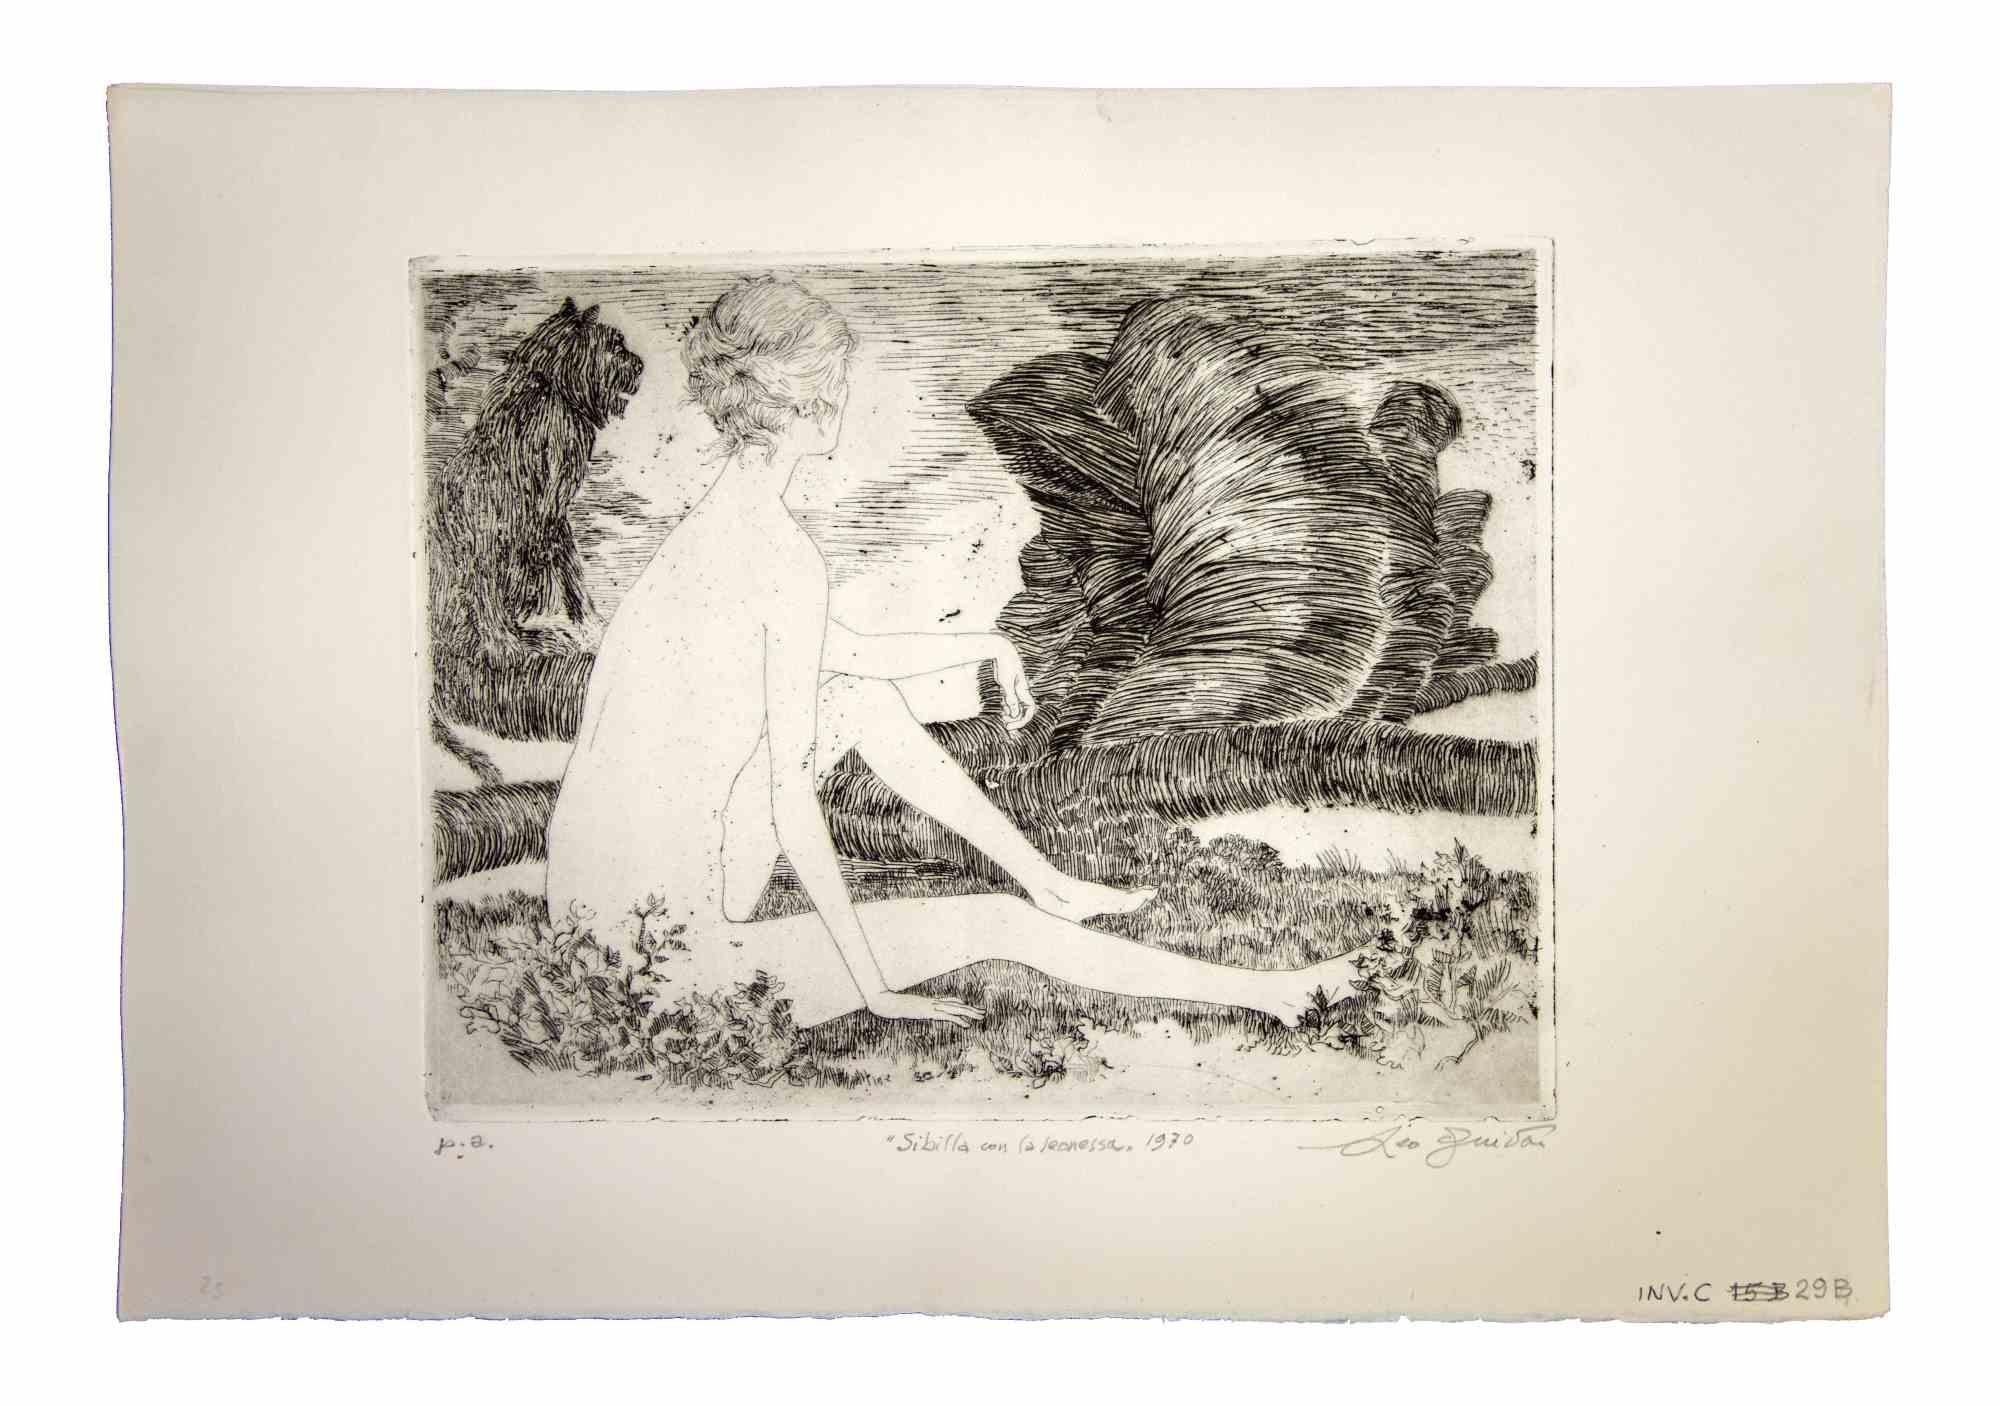 Sibyl with the Lioness is an original etching and aquatint realized by Leo Guida in 1970.

Good condition.

Mounted on a white cardboard passpartout (35x50).

Artist proof.

Dated and signed by the author.

Leo Guida  (1992 - 2017). Sensitive to